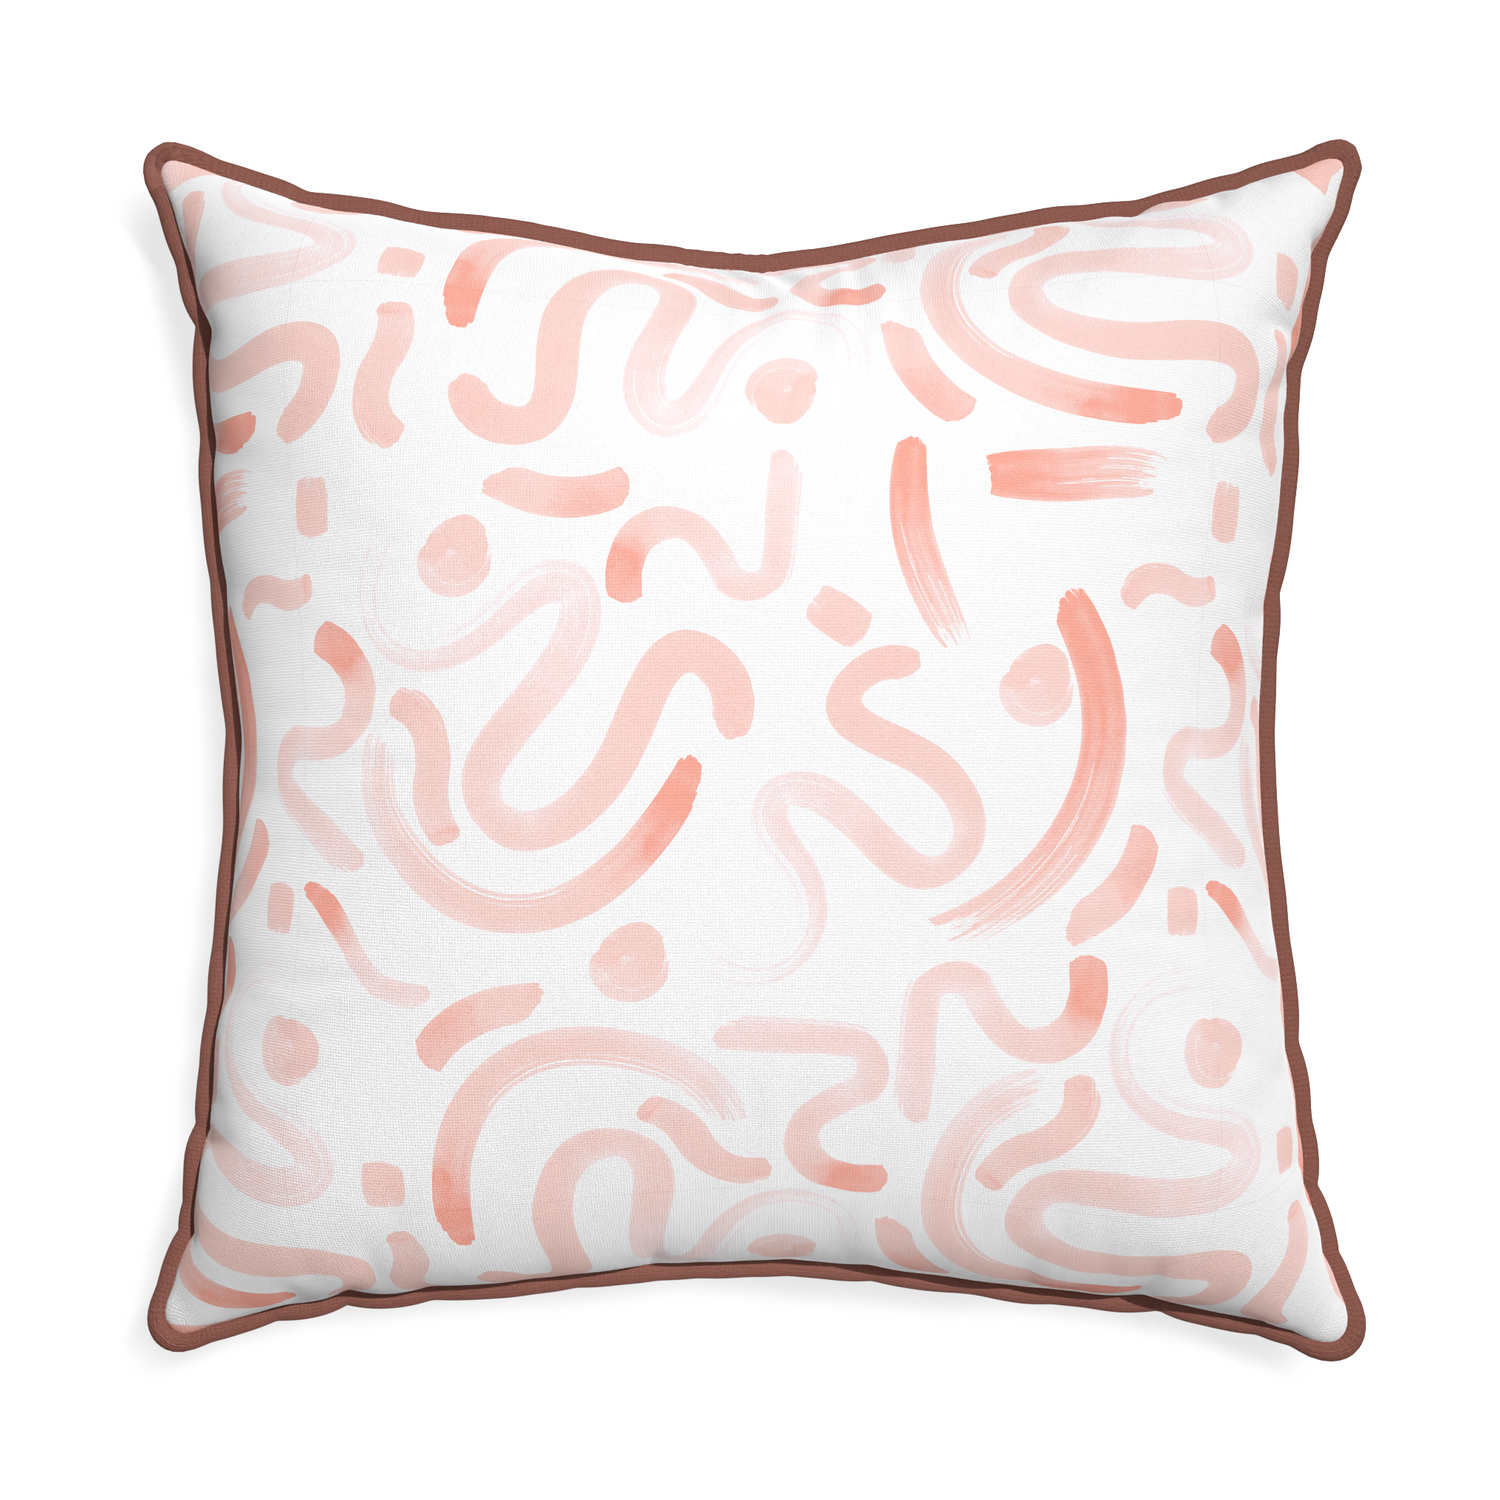 Euro-sham hockney pink custom pink graphicpillow with w piping on white background